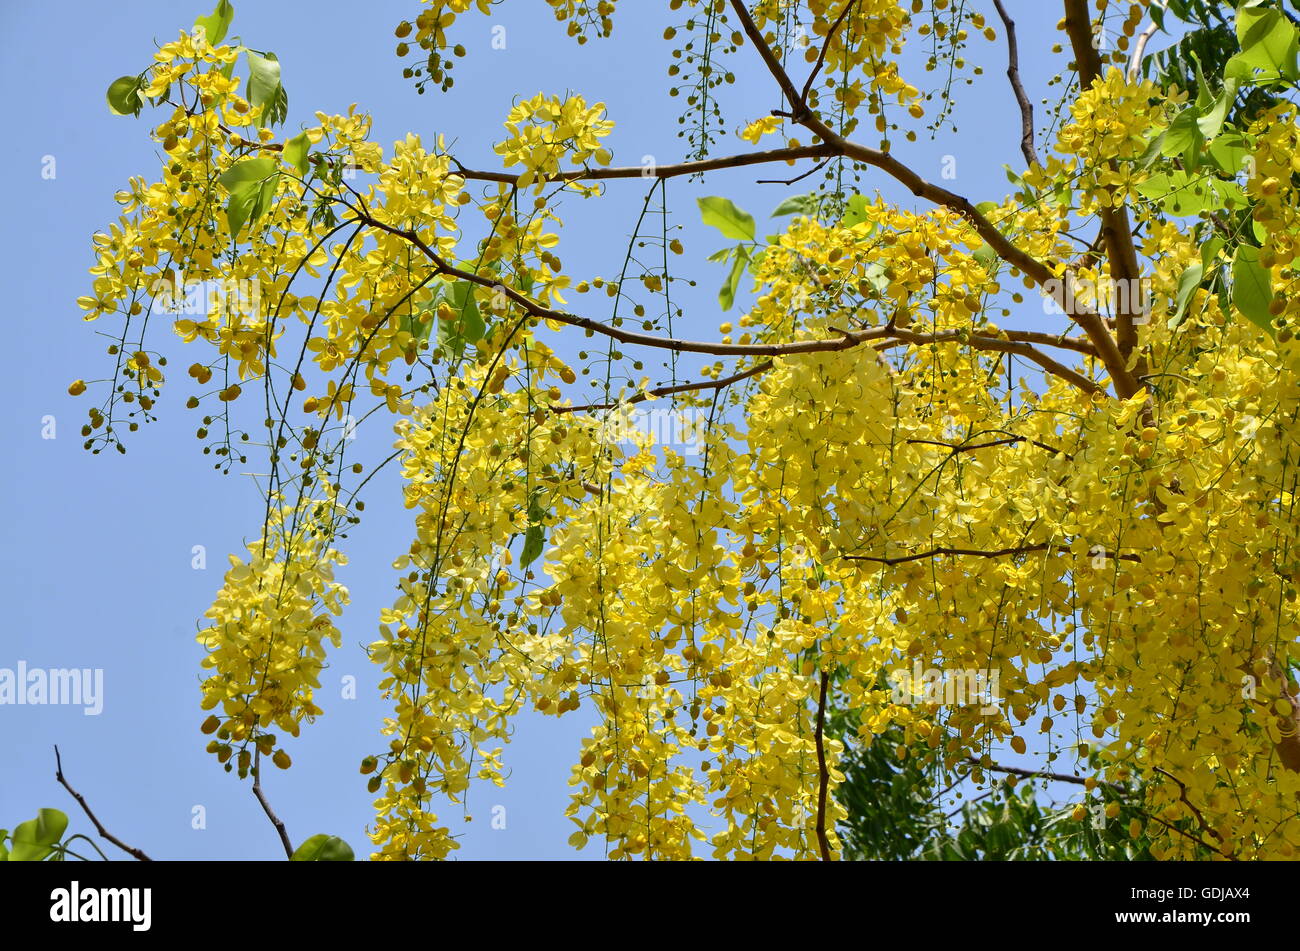 ' Shower of Gold ' with its tendrils of delicate hanging yellow flowers. Also called 'Bahava' or 'Cassia'. Stock Photo